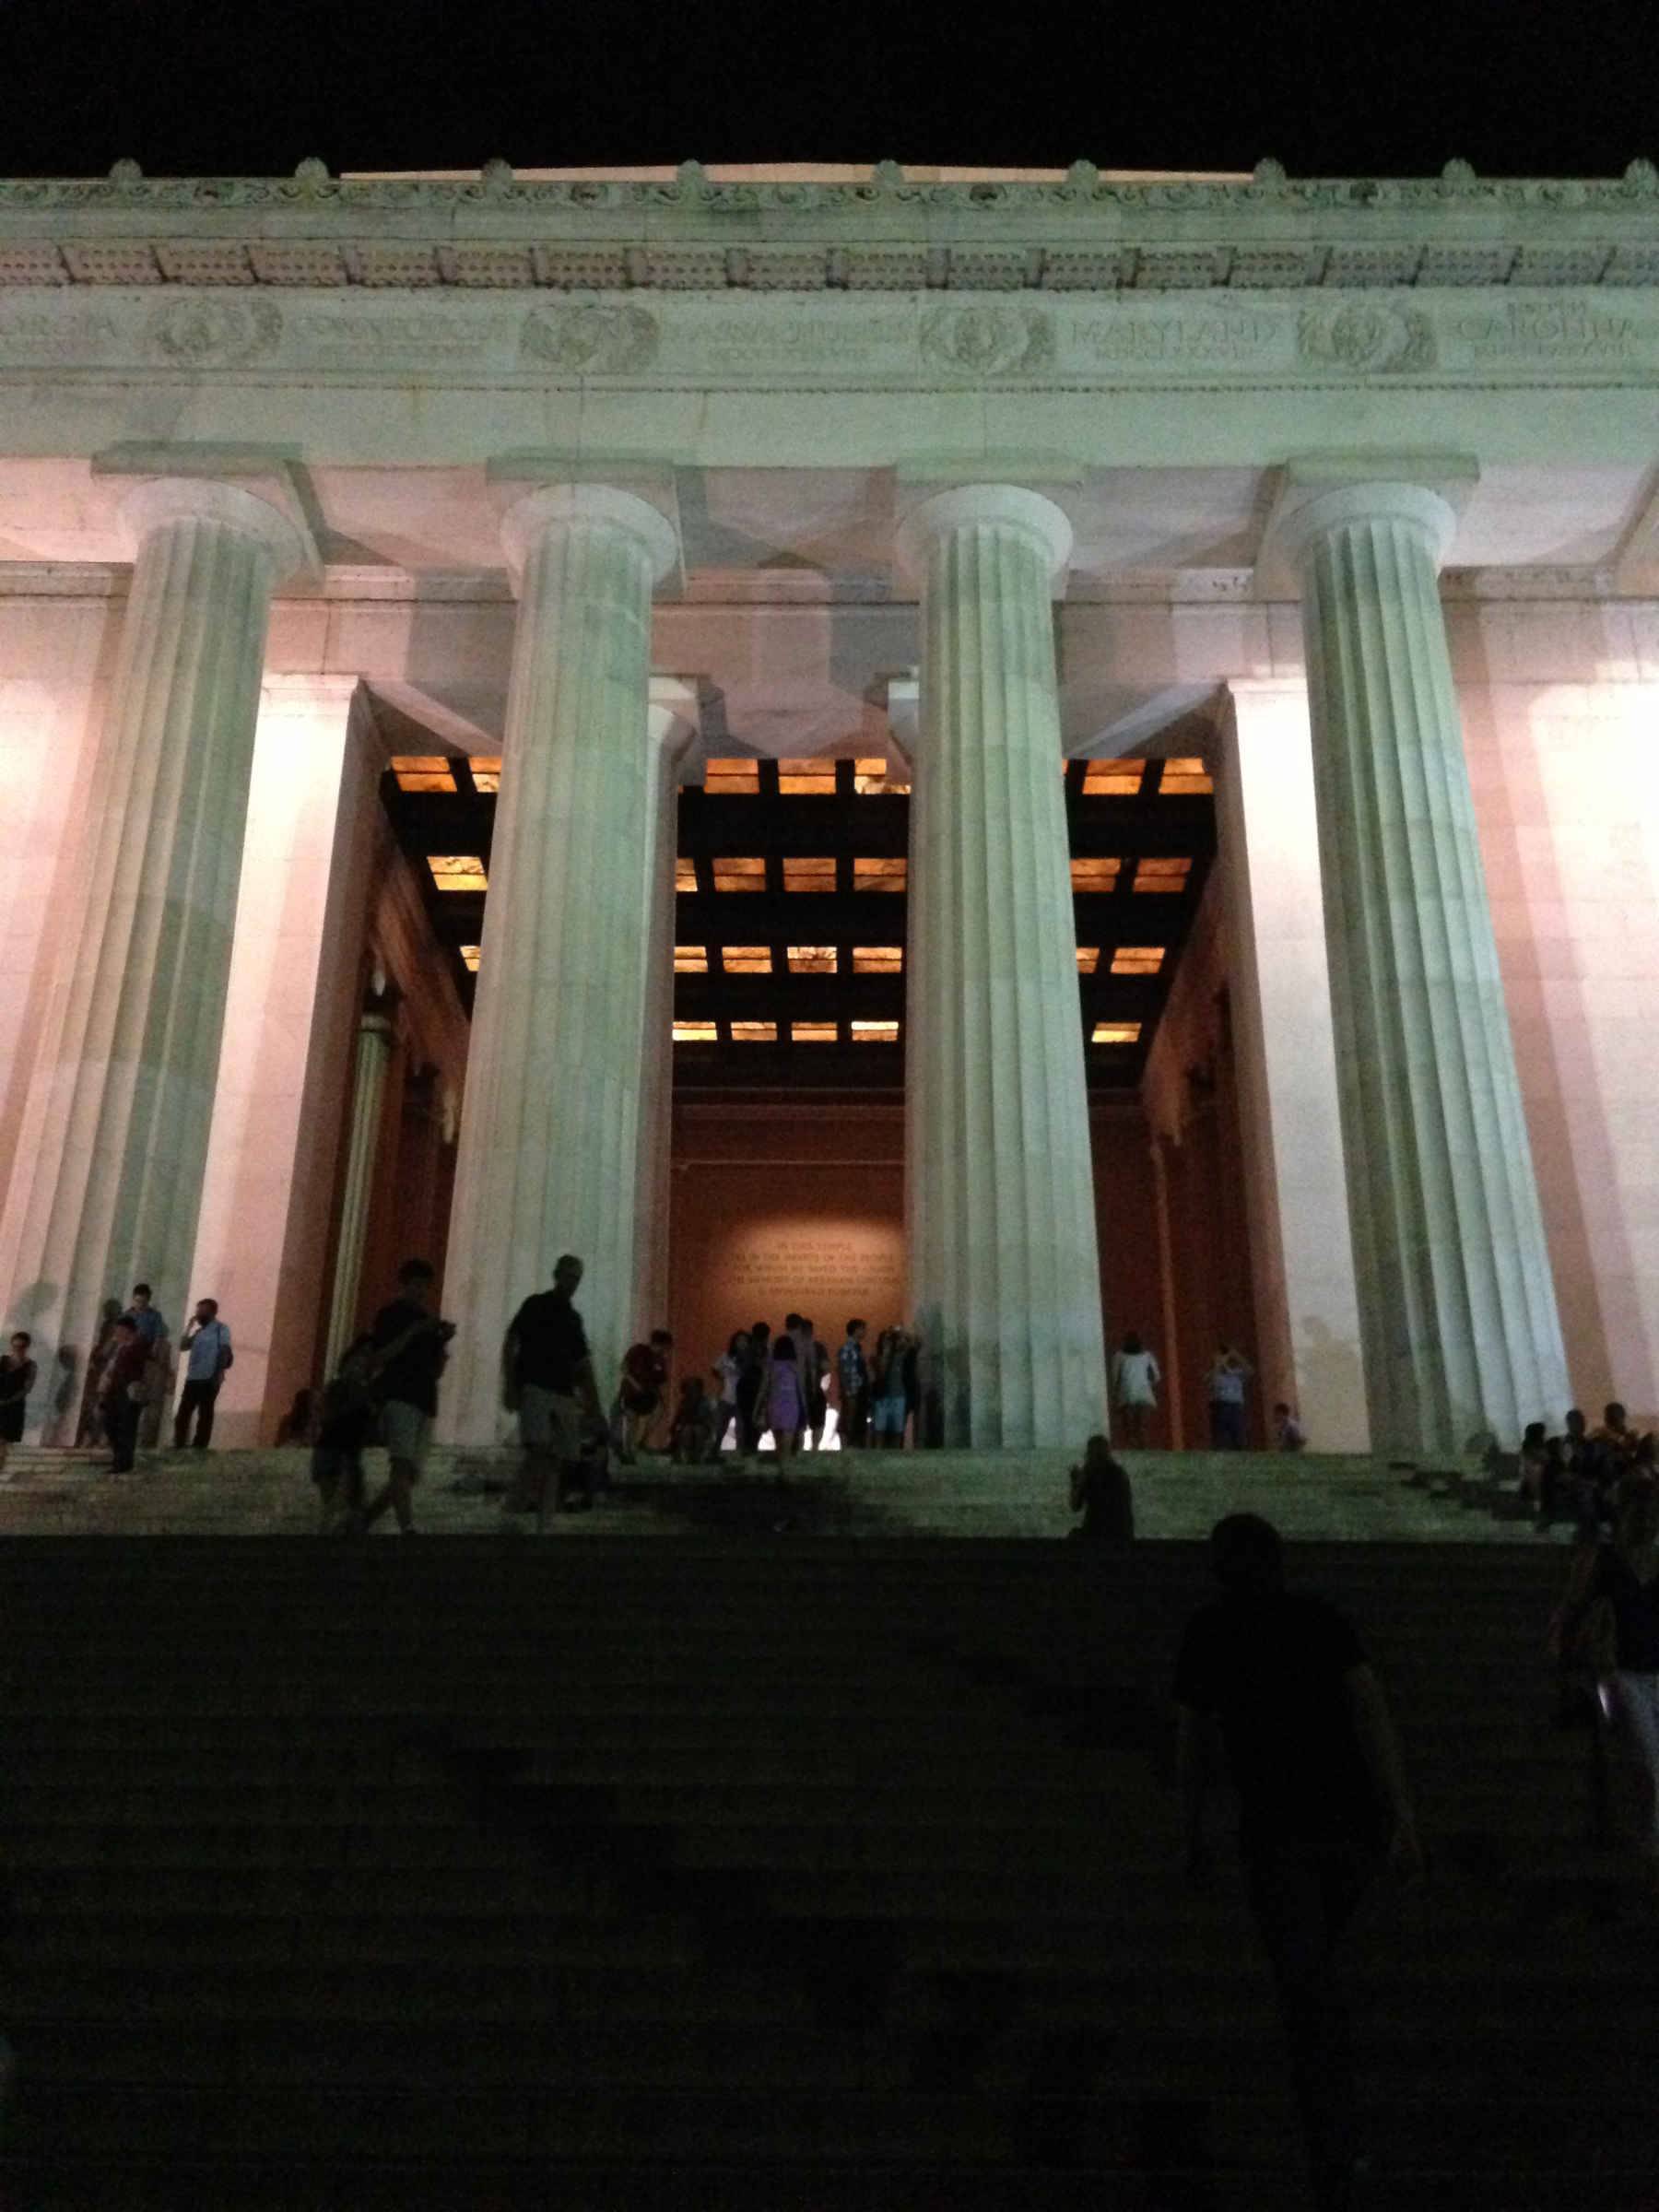 Outside steps of the Lincoln Memorial